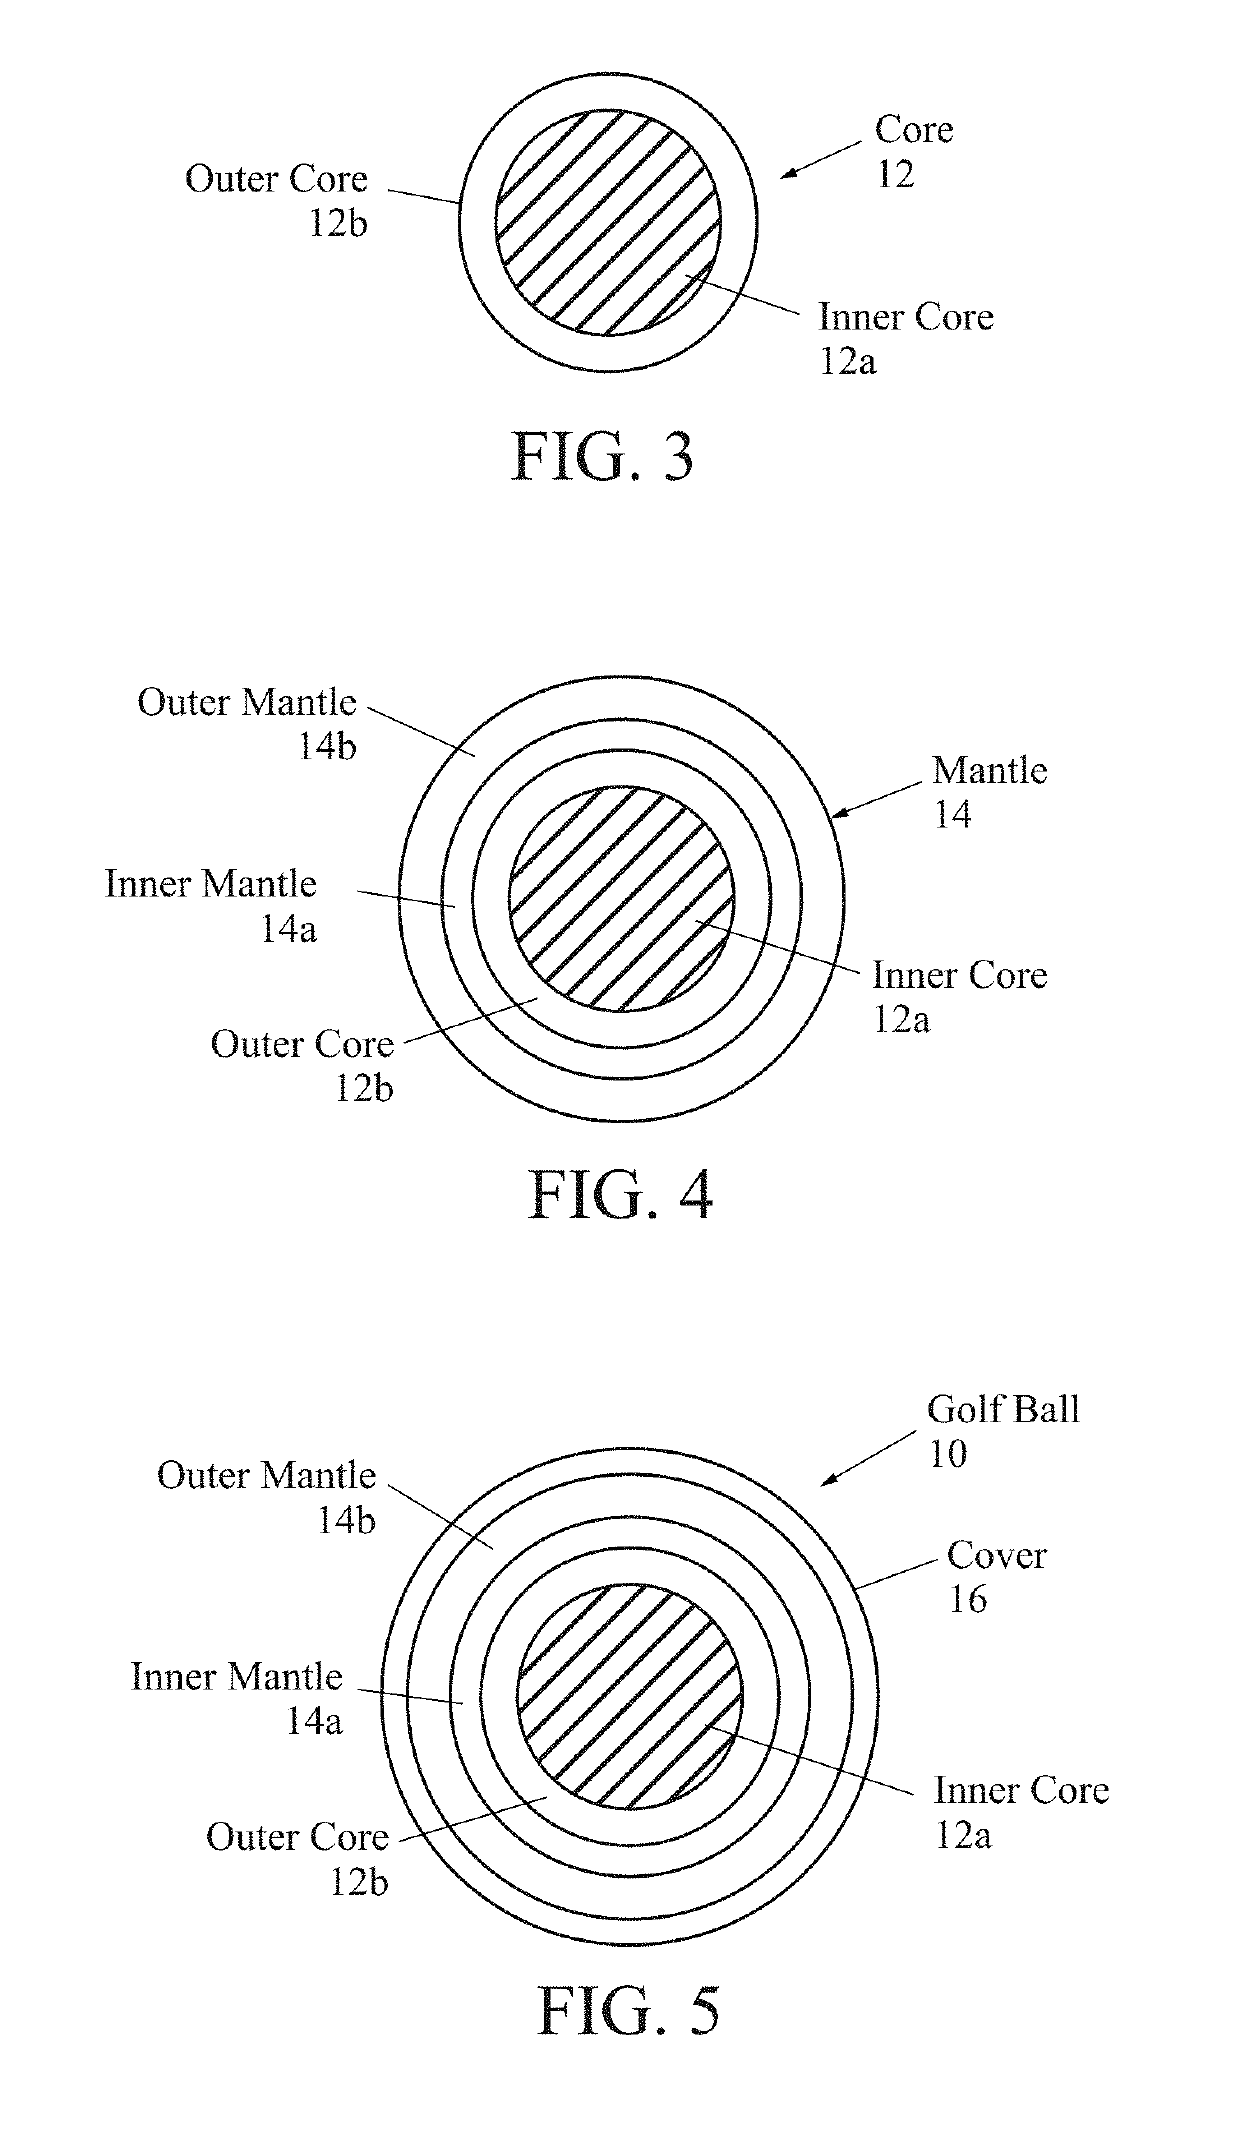 Graphene core golf ball with an integrated circuit